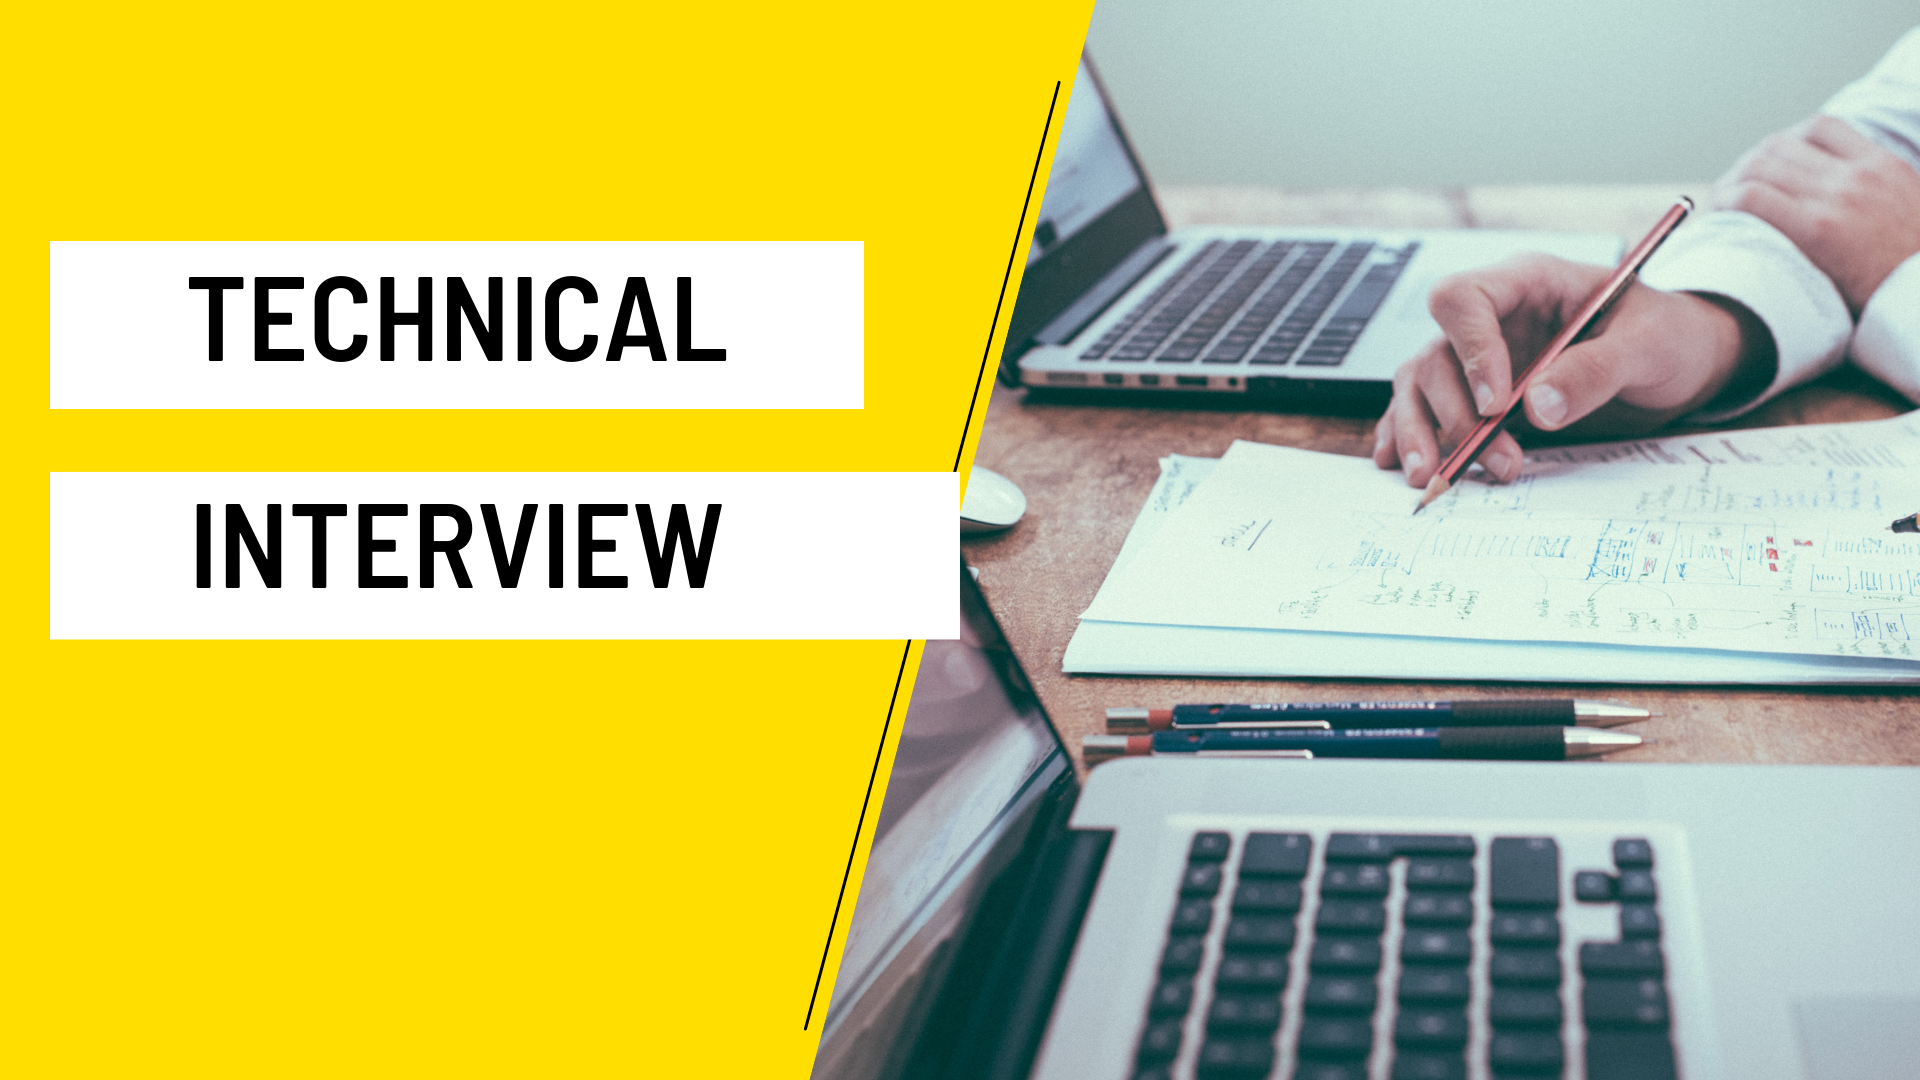 TECHNICAL INTERVIEW